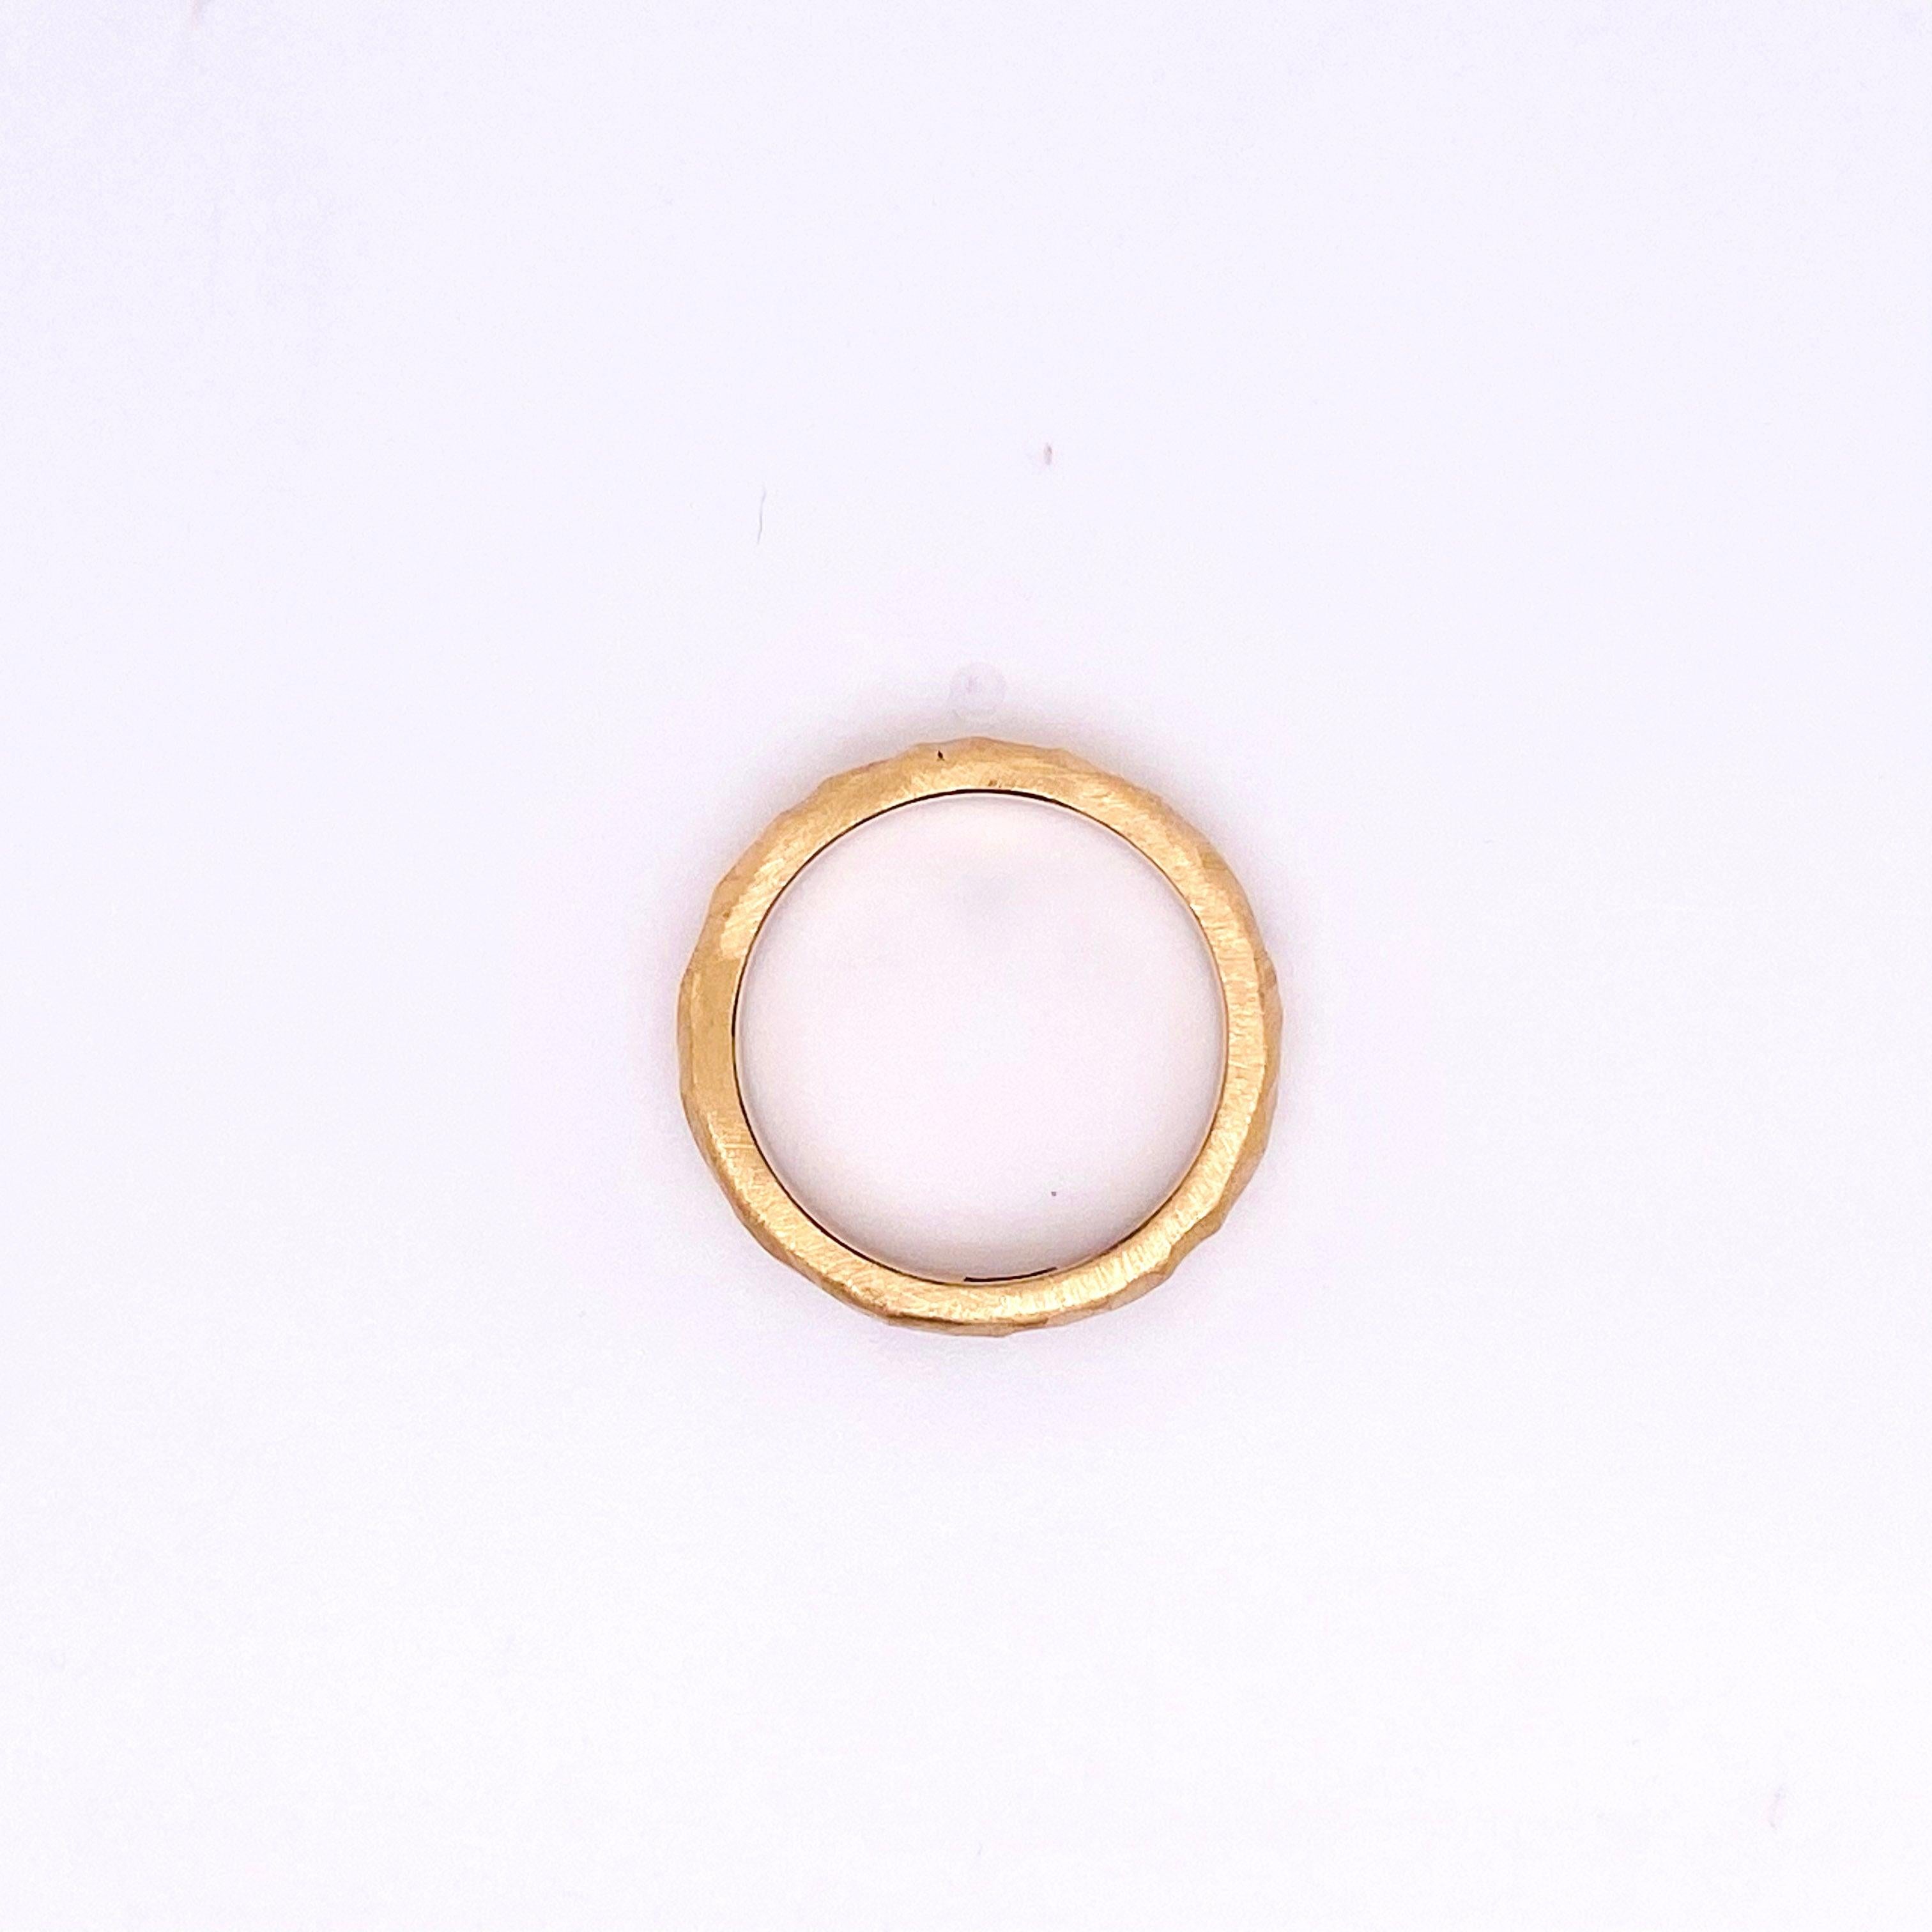 For Sale:  Gold Band Ring, Hammered, Yellow Gold, Handmade, Wedding Band, Stackable 3